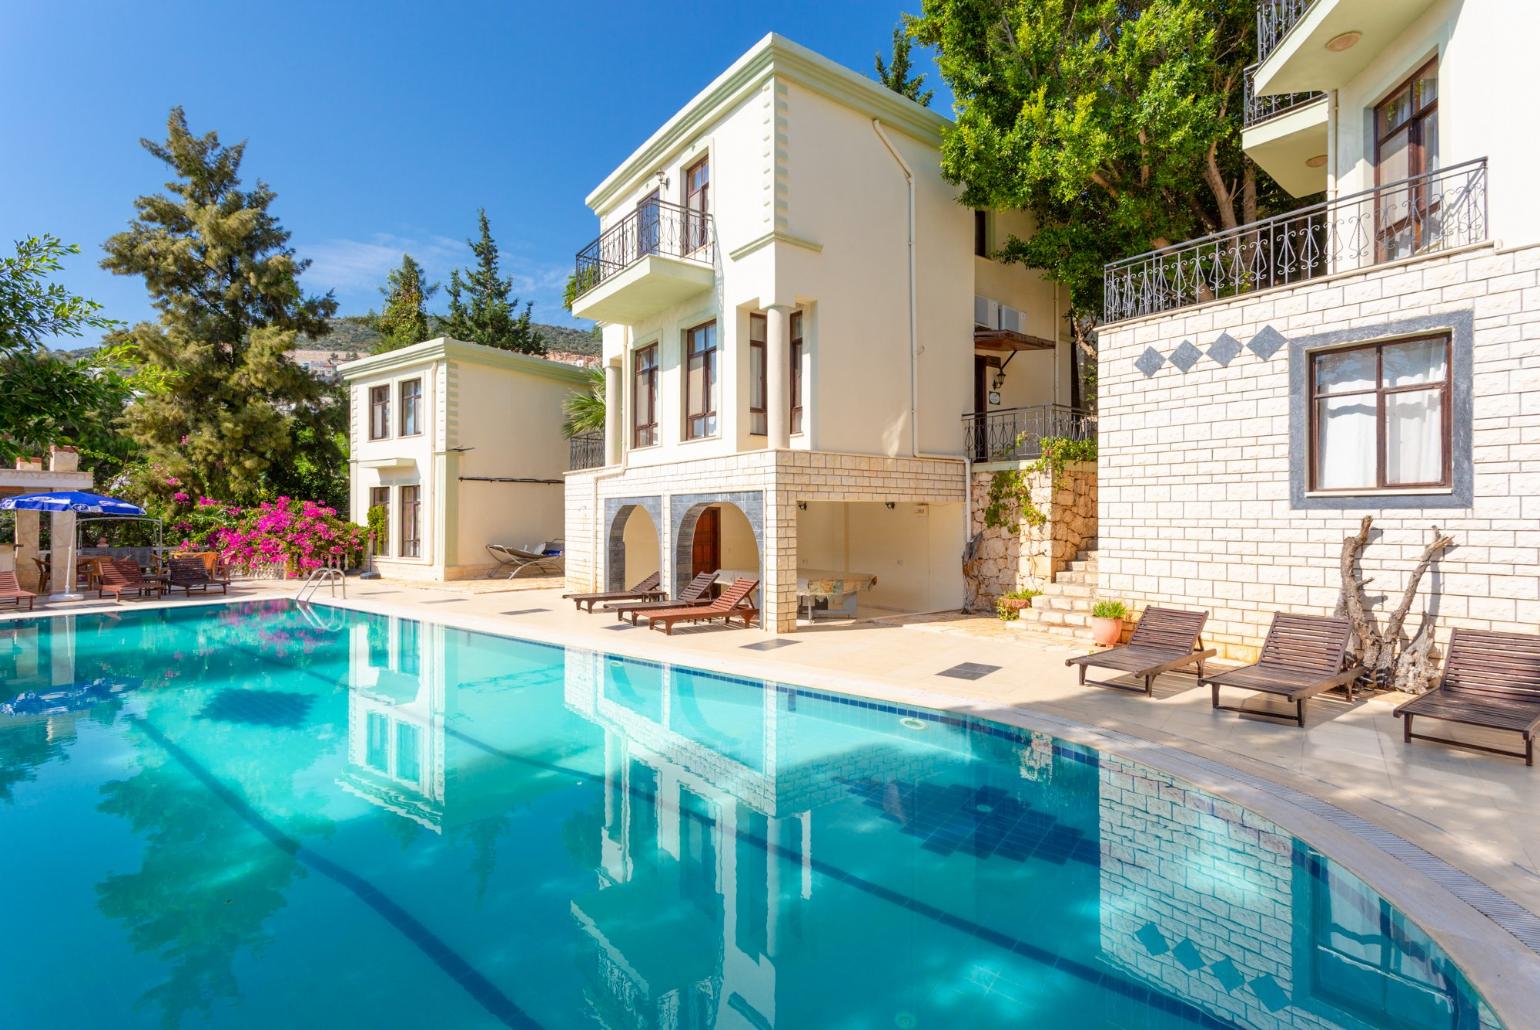 Large shared pool available to clients staying at Villa Arykanoos